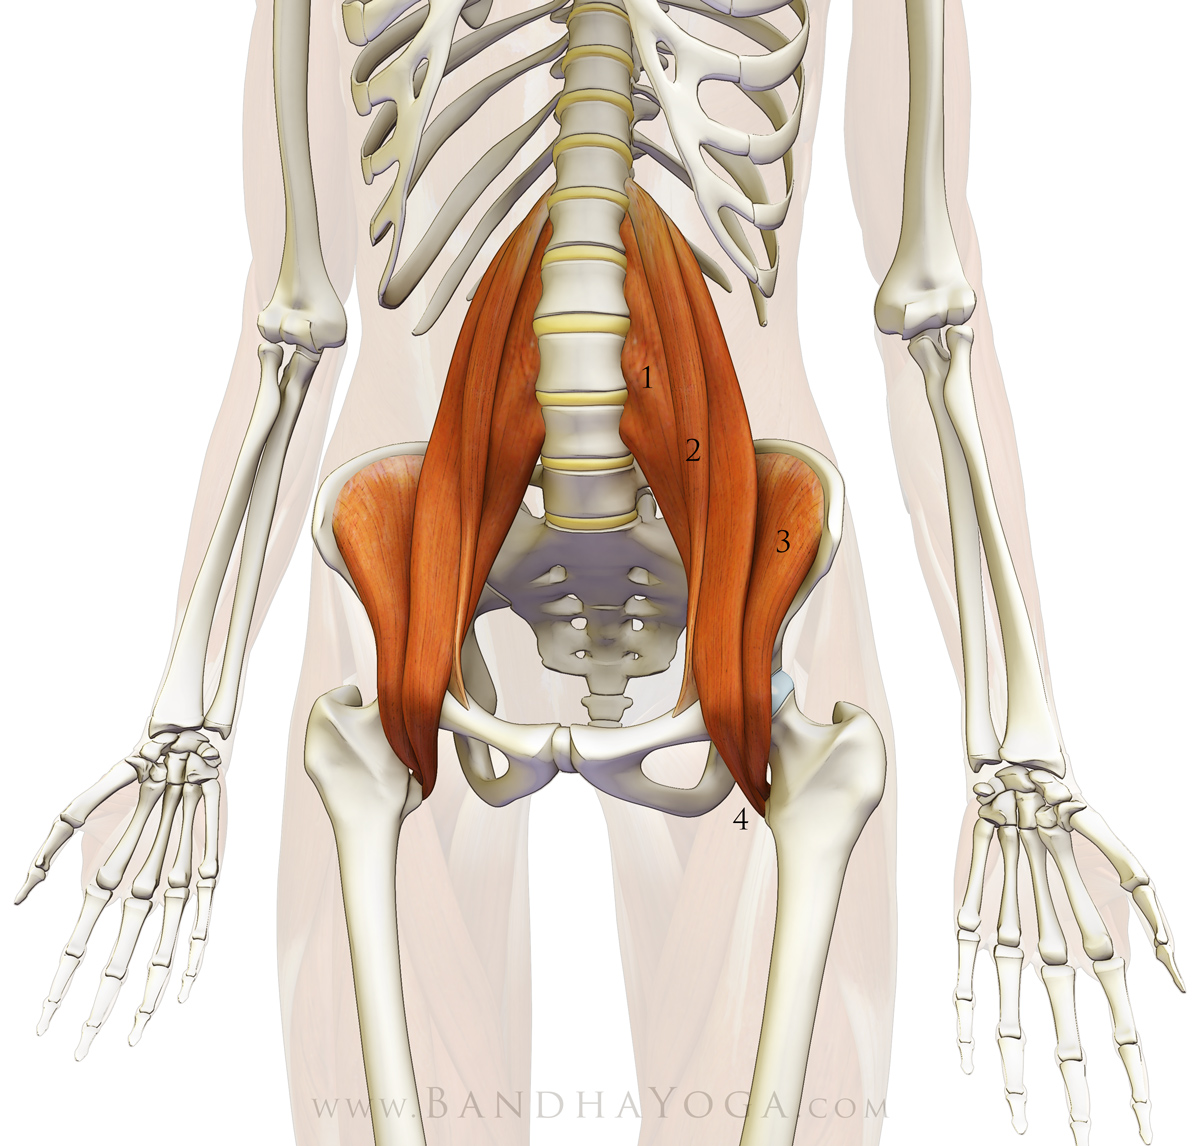 Iliopsoas starts at the front of the spine and the ilium, goes through the pelvic cavity, and attaches to the femur. It gets tight on people who sit a lot, particularly if you are tense while sitting (motorcylists and people who hate their jobs). 